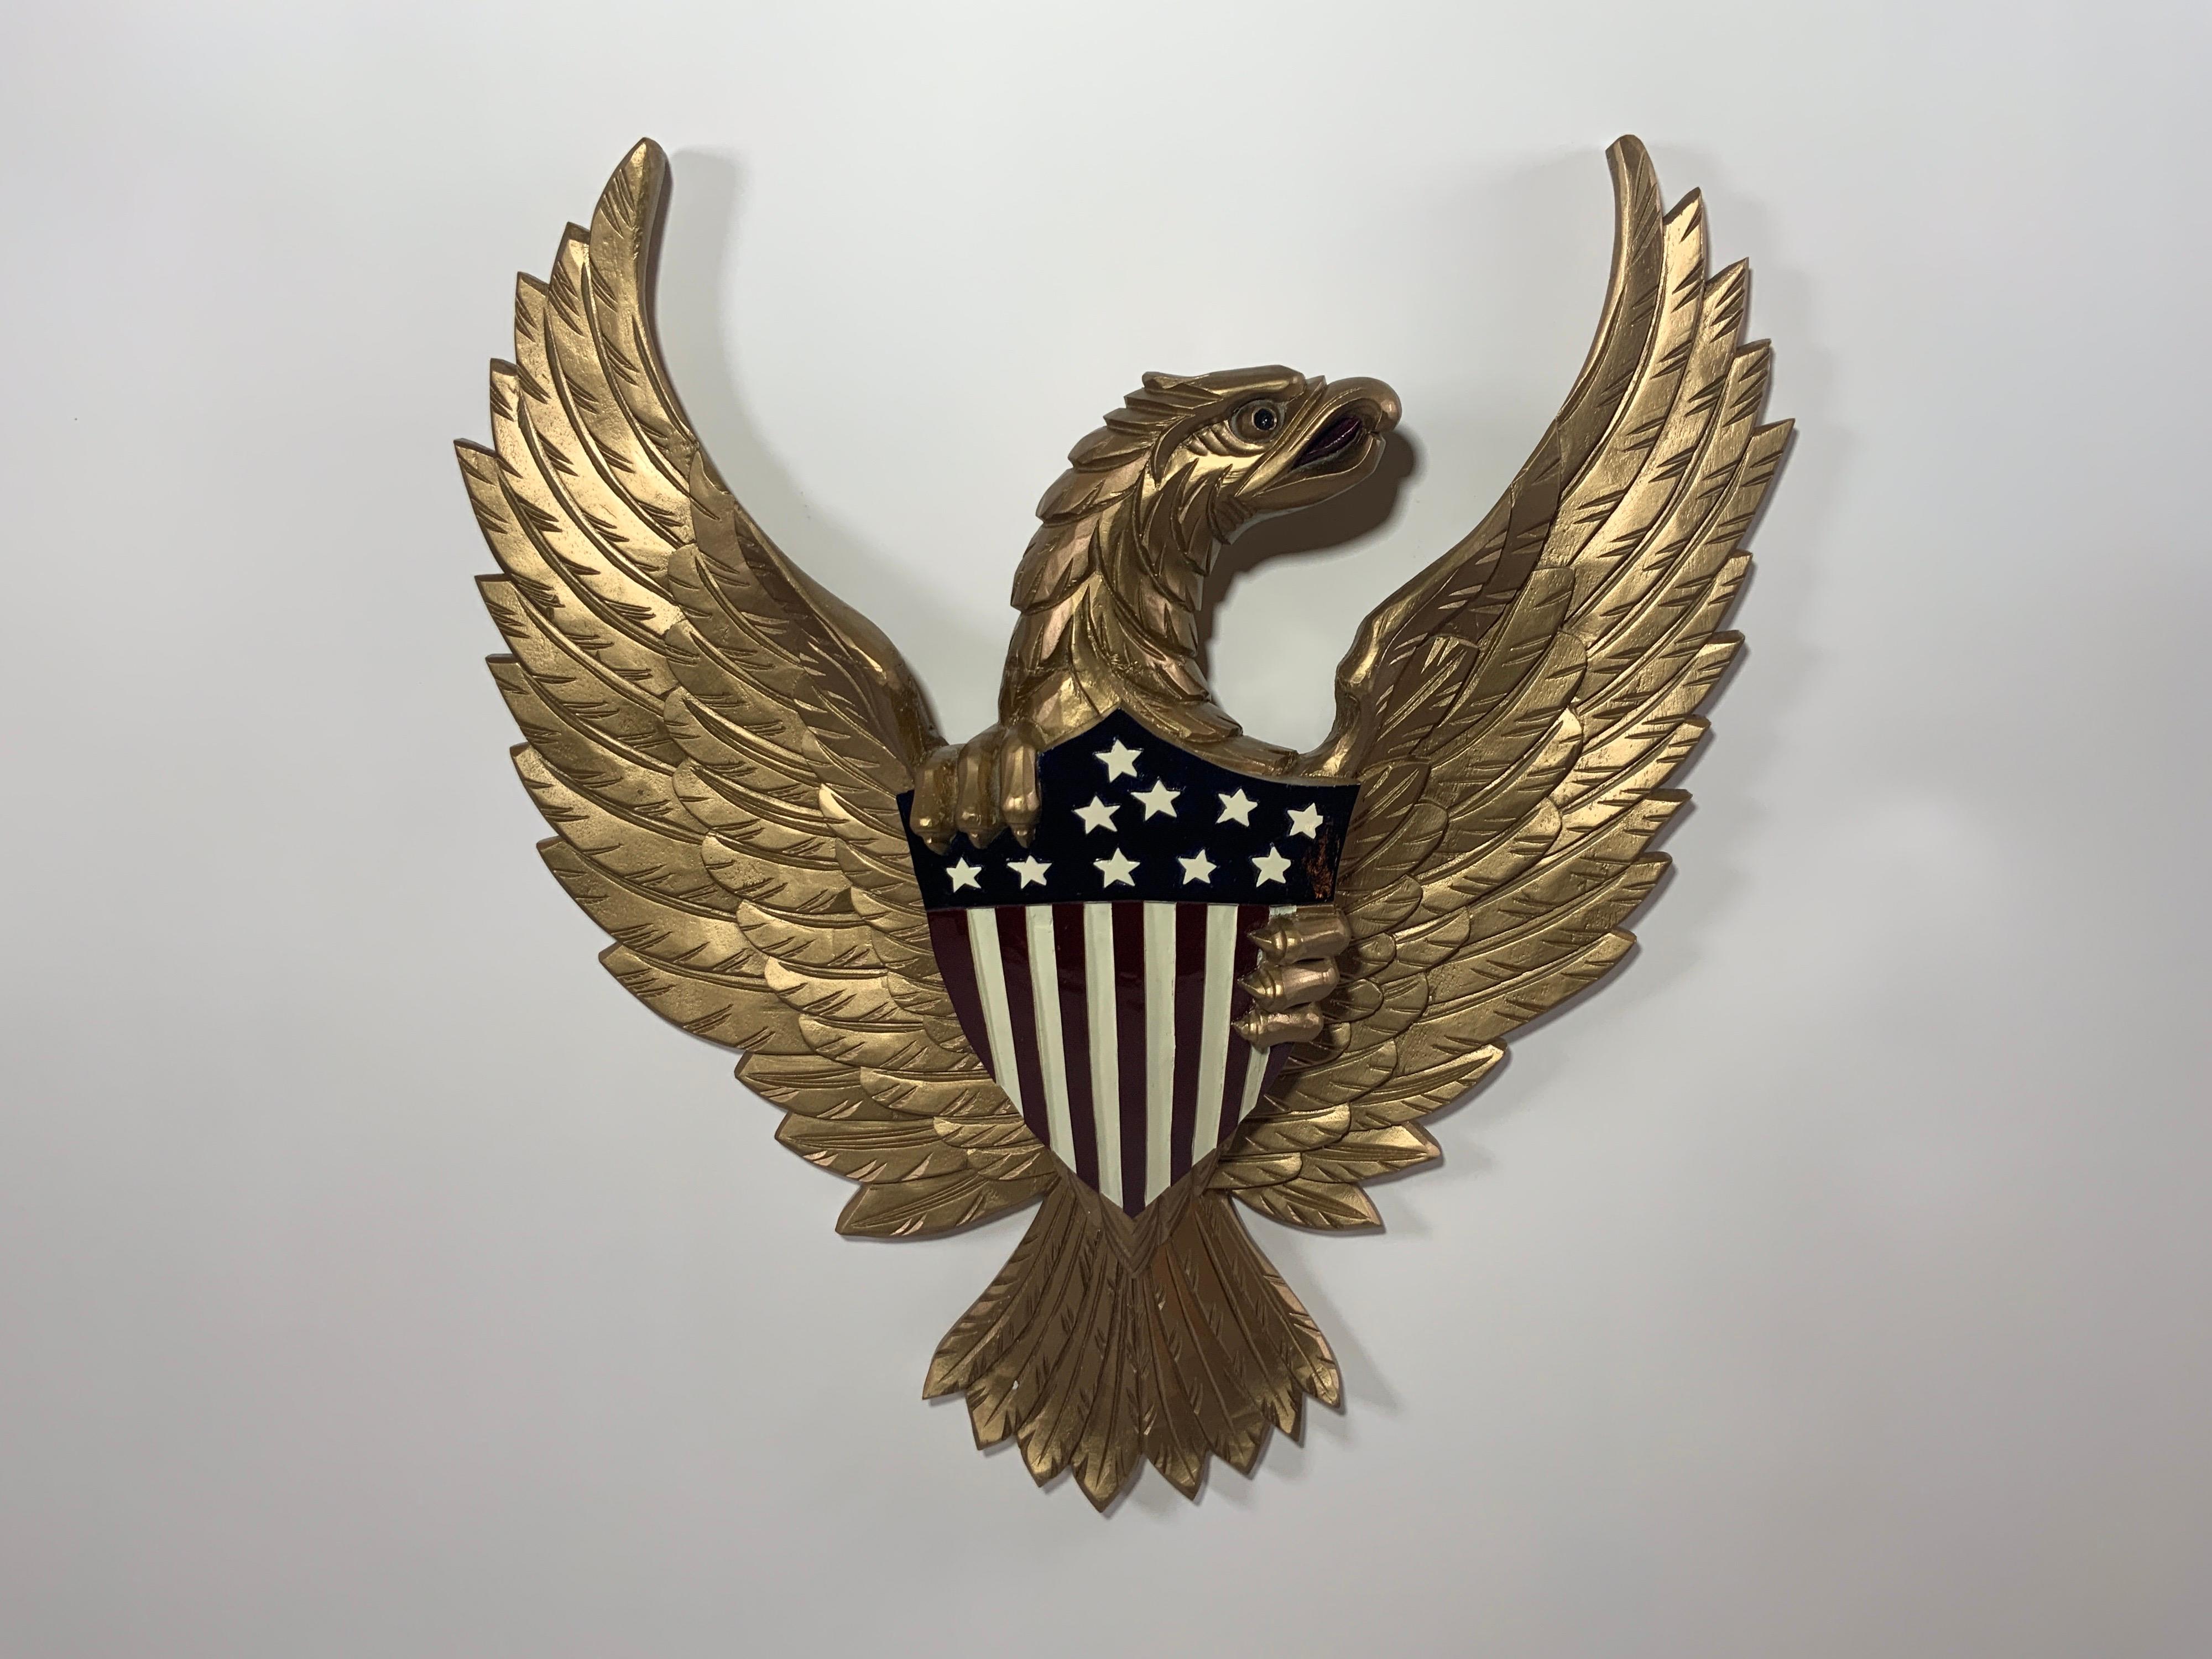 Carved wooden eagle painted with an old gold finish. Eagle is very detailed and clutching the Great Seal in the likeness of the US Coat of Arms. Rear hanging wire.

Overall dimensions: 21